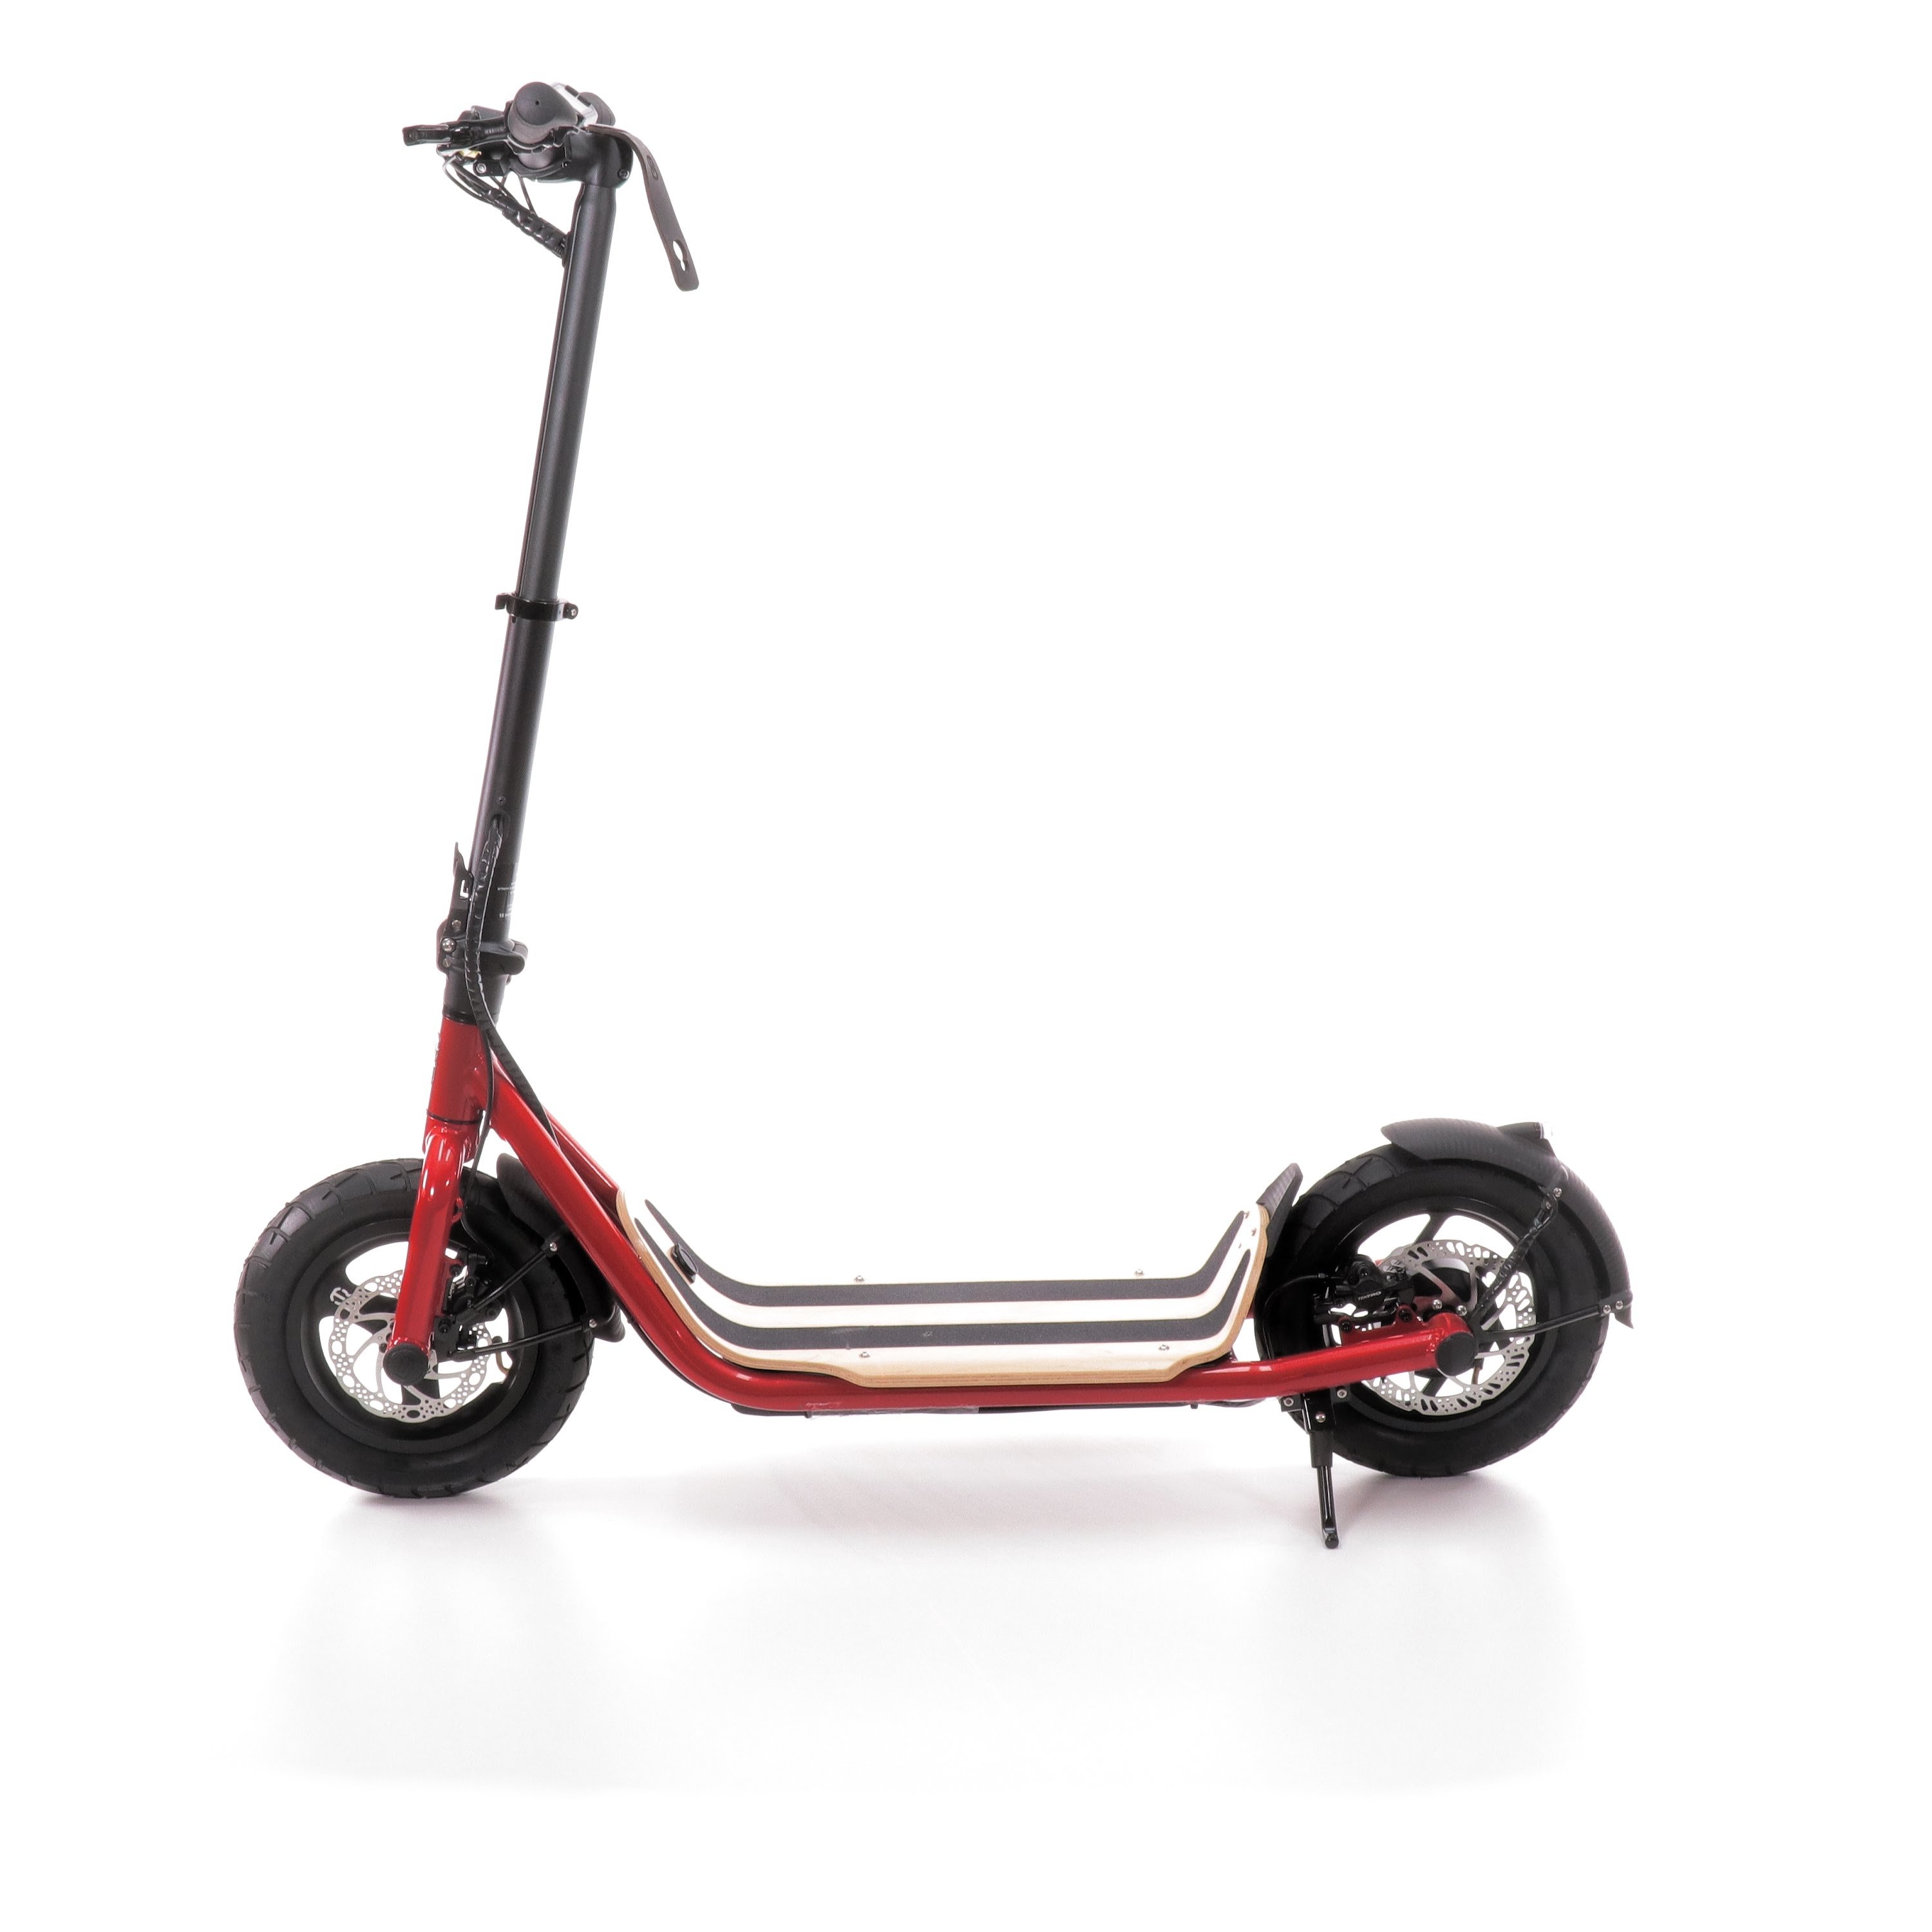 8Tev B12 Proxi Electric Scooter – Red